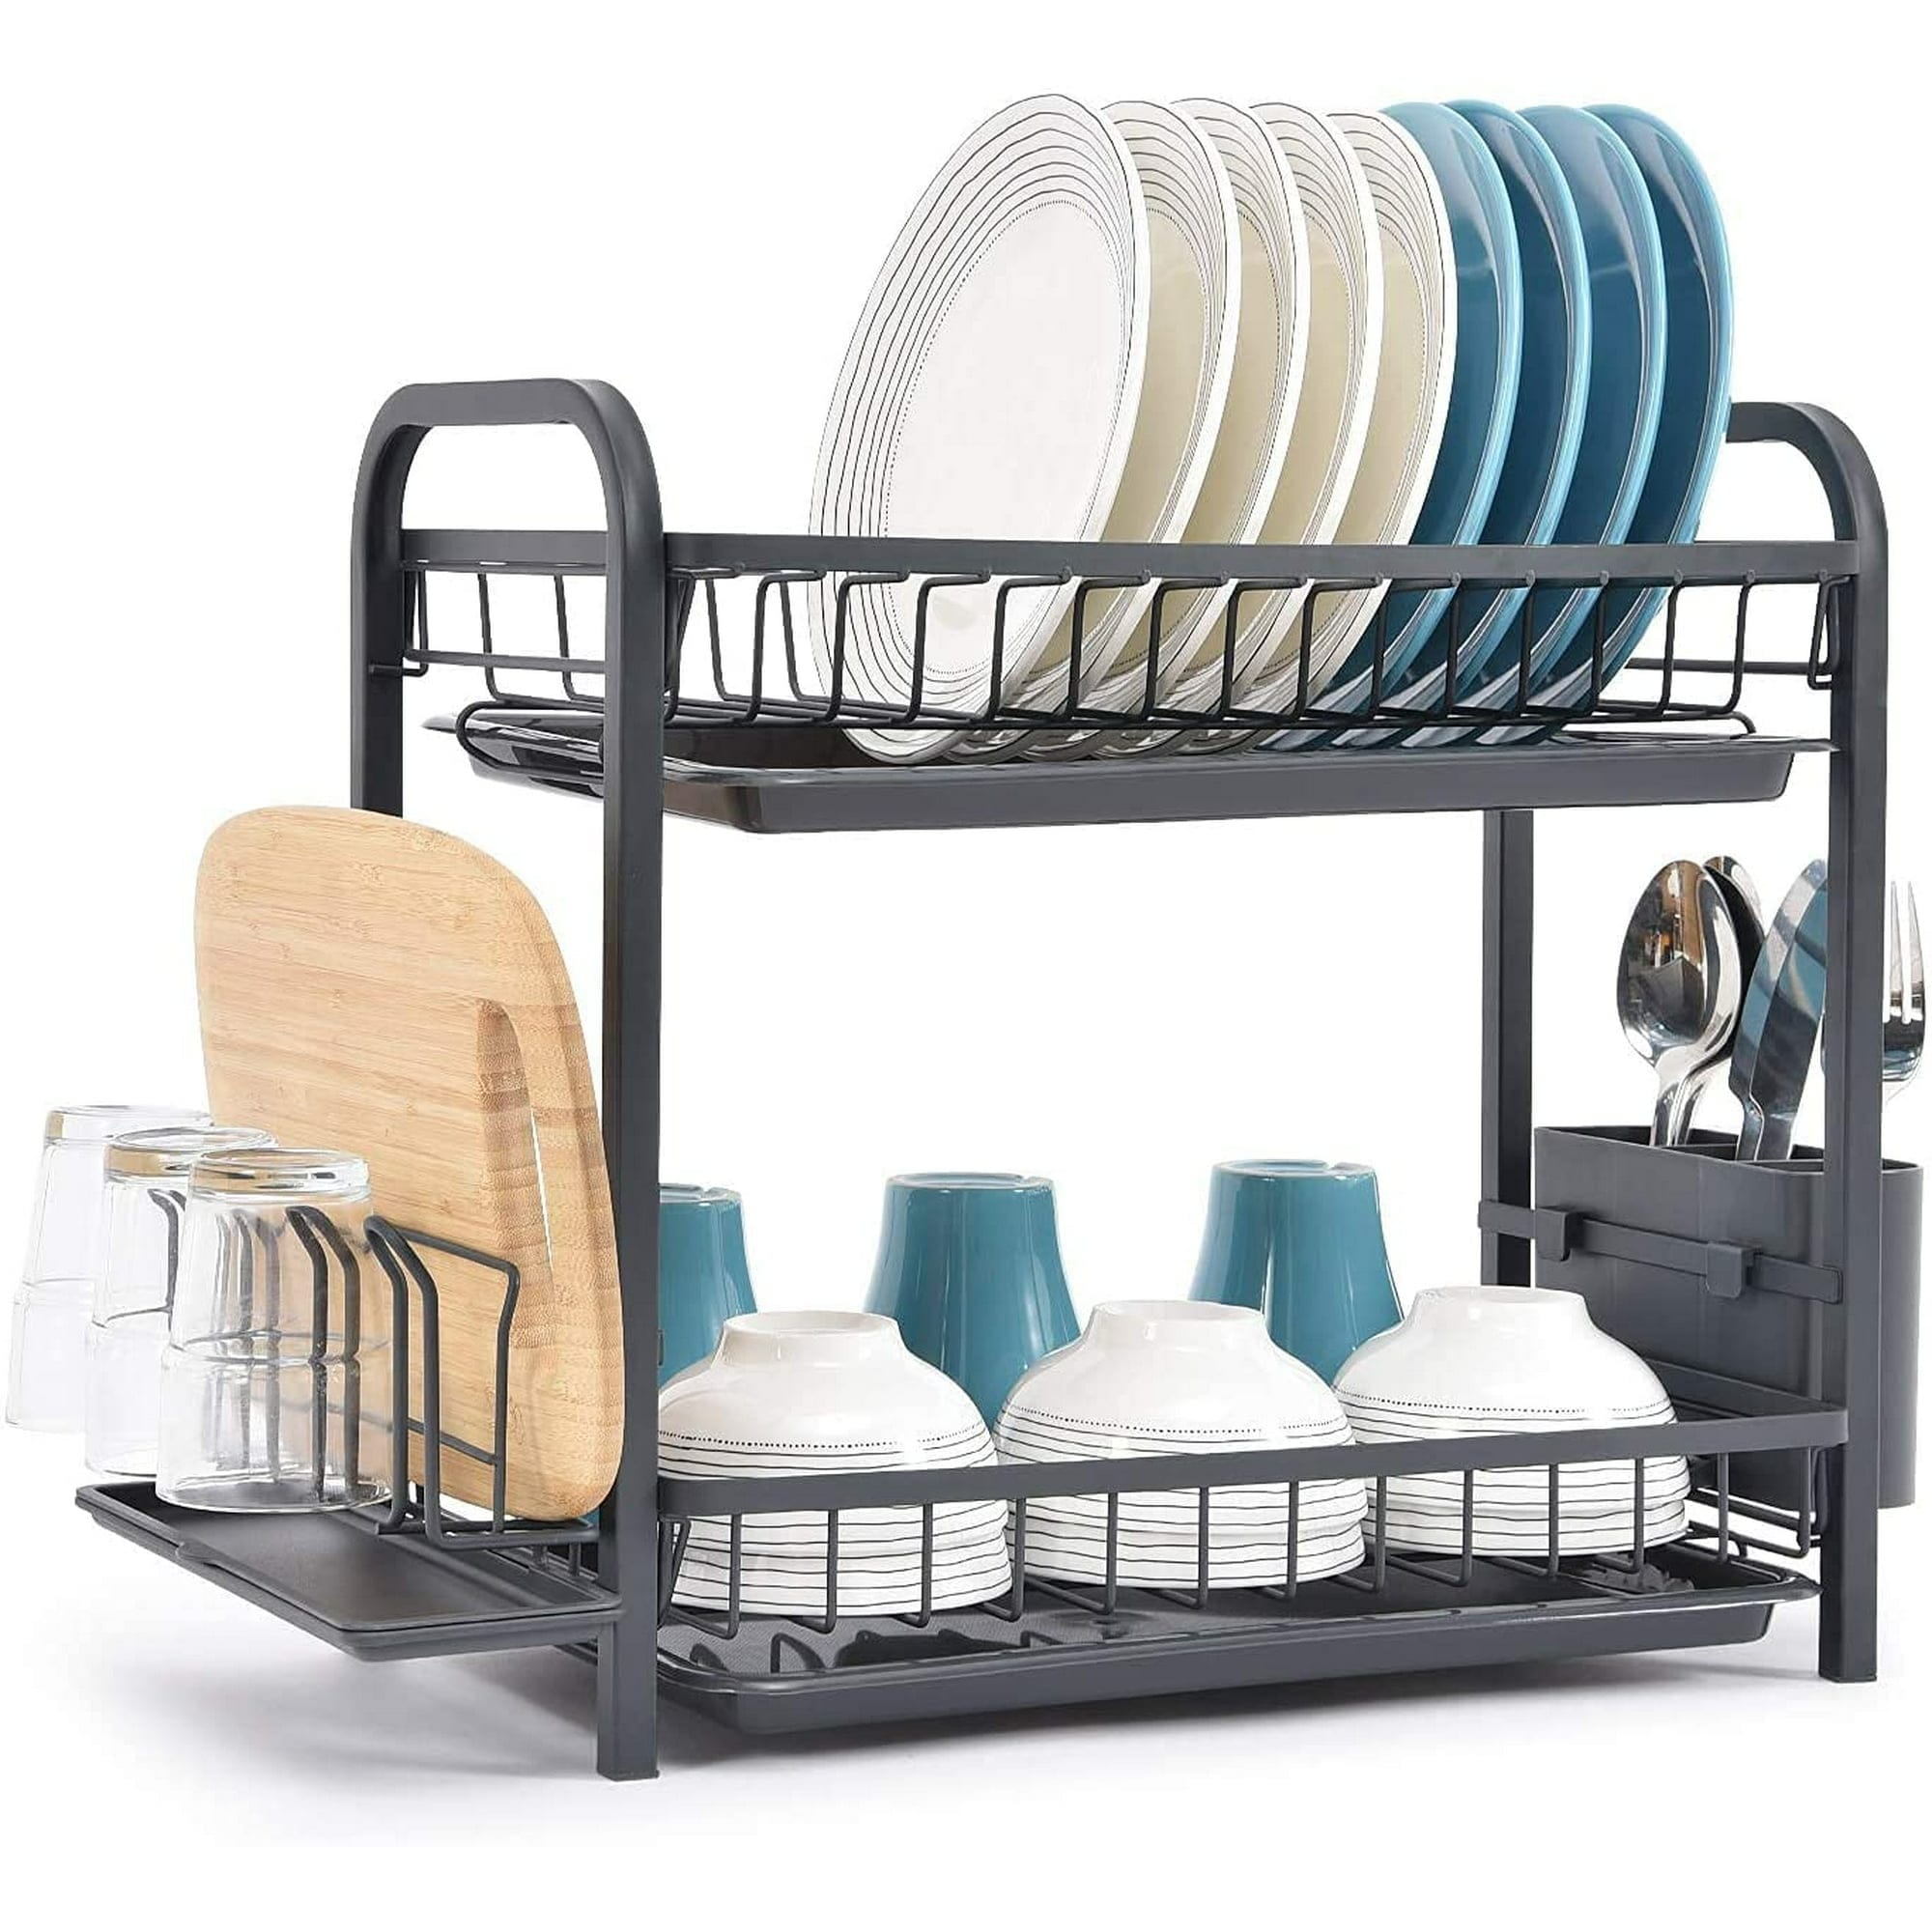 https://ak1.ostkcdn.com/images/products/is/images/direct/8f79ffa681e3f21e2e5ed53e7aa9360af08d4e5d/2-Tier-Dish-Rack-and-Drainboard-Set-with-Utensil-Holder.jpg